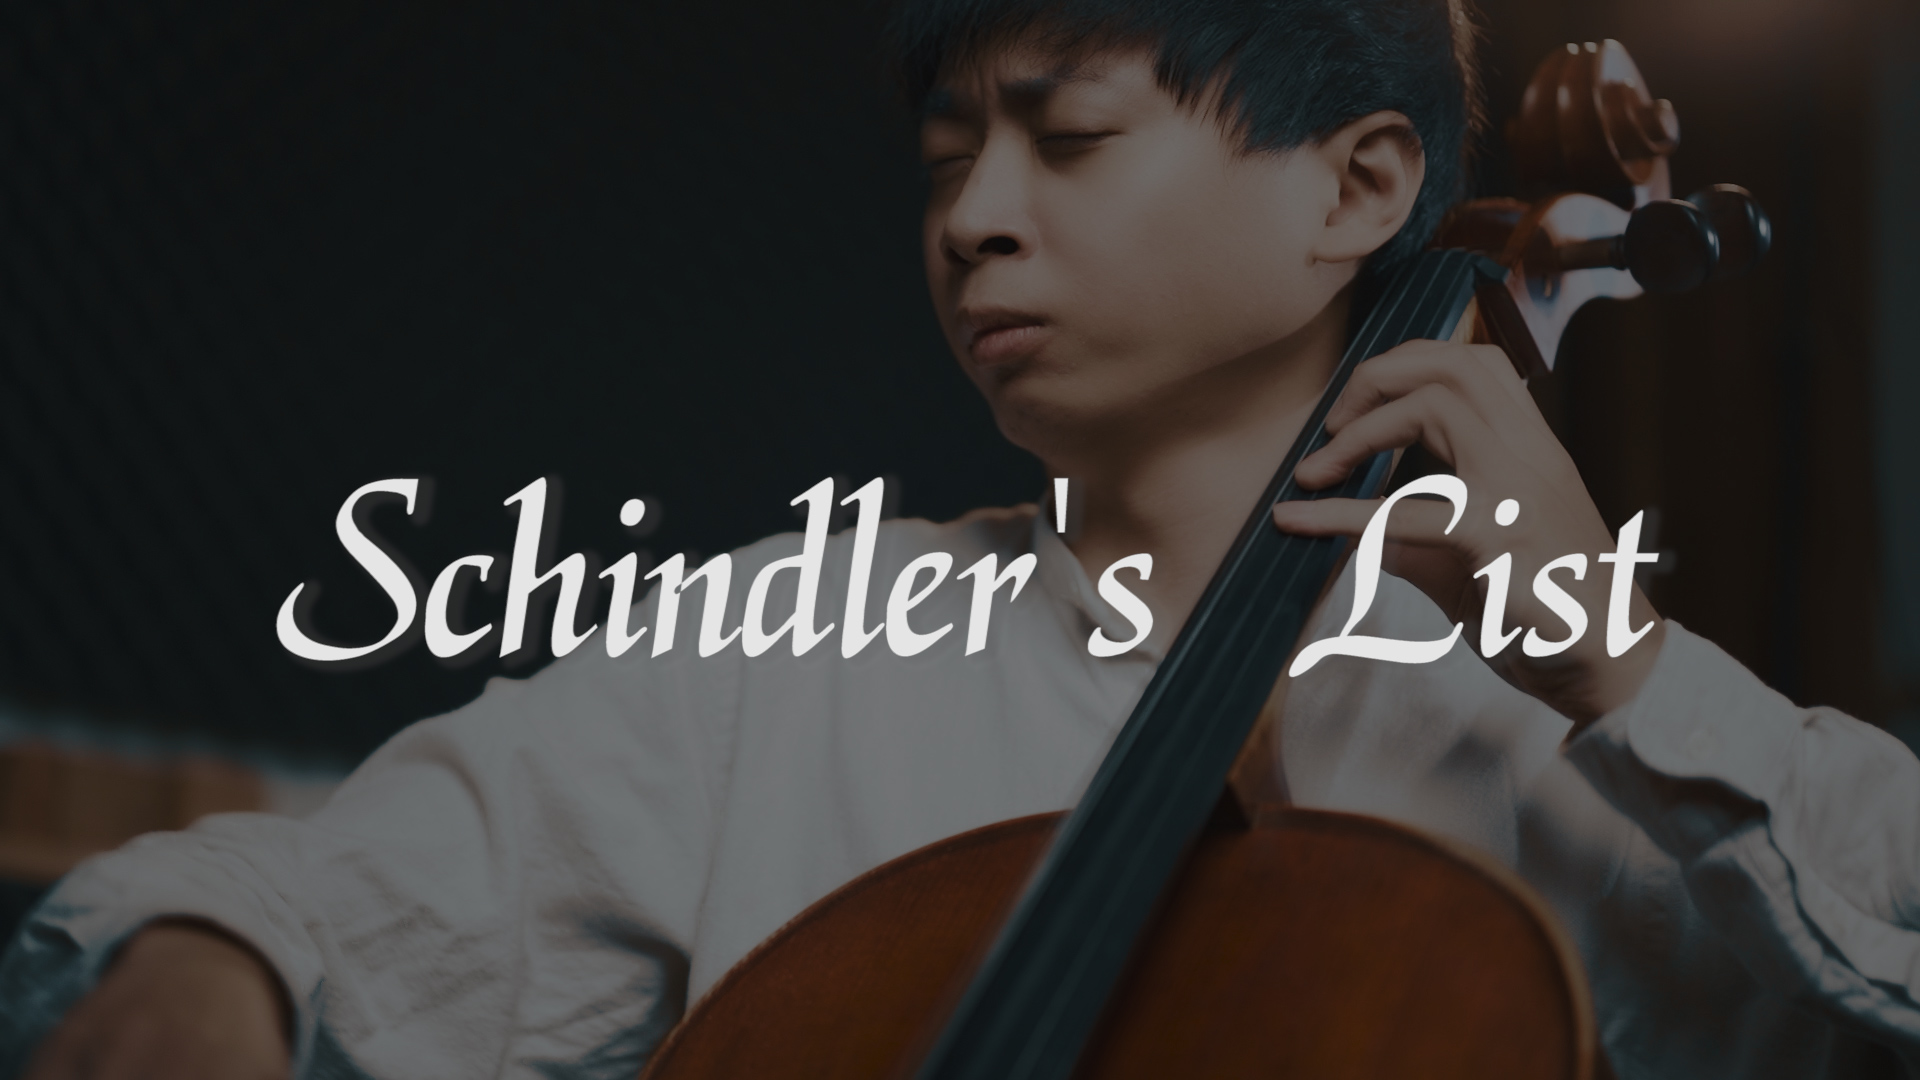 Theme from Schindler's List cello cover 辛德勒名單 大提琴版本 『cover by YoYo Cello』